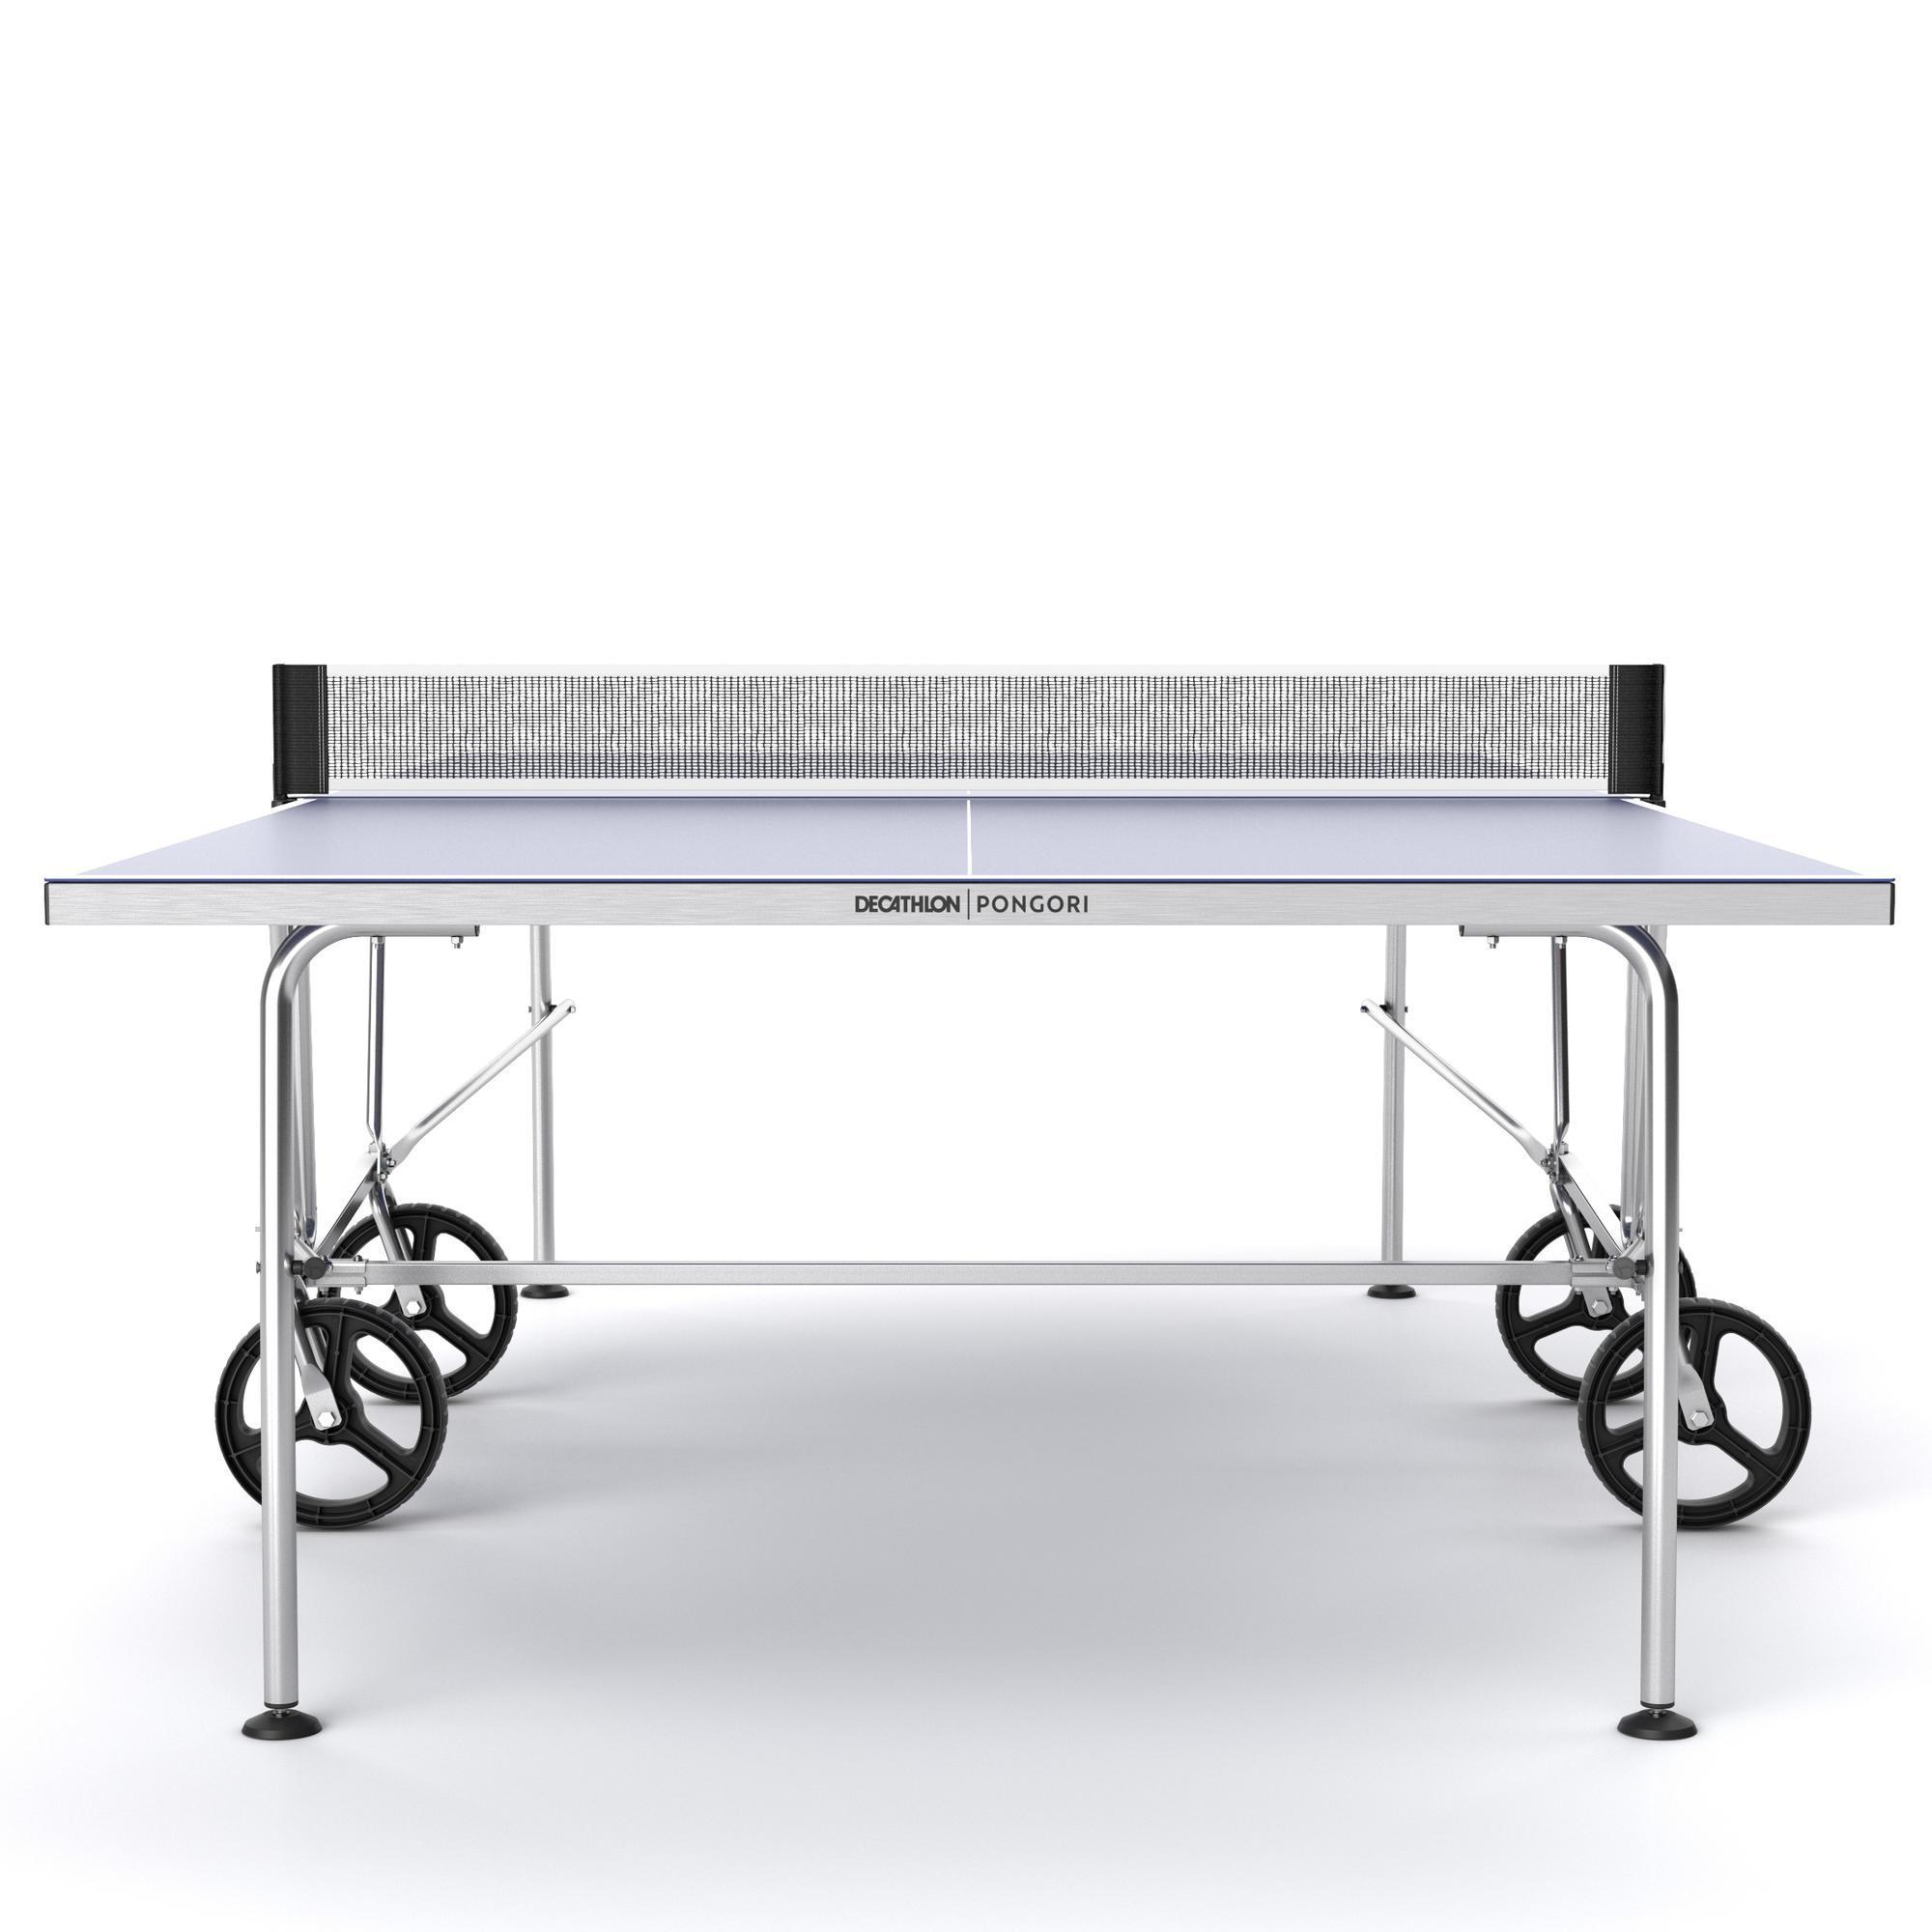 Outdoor Table Tennis Table PPT 500 